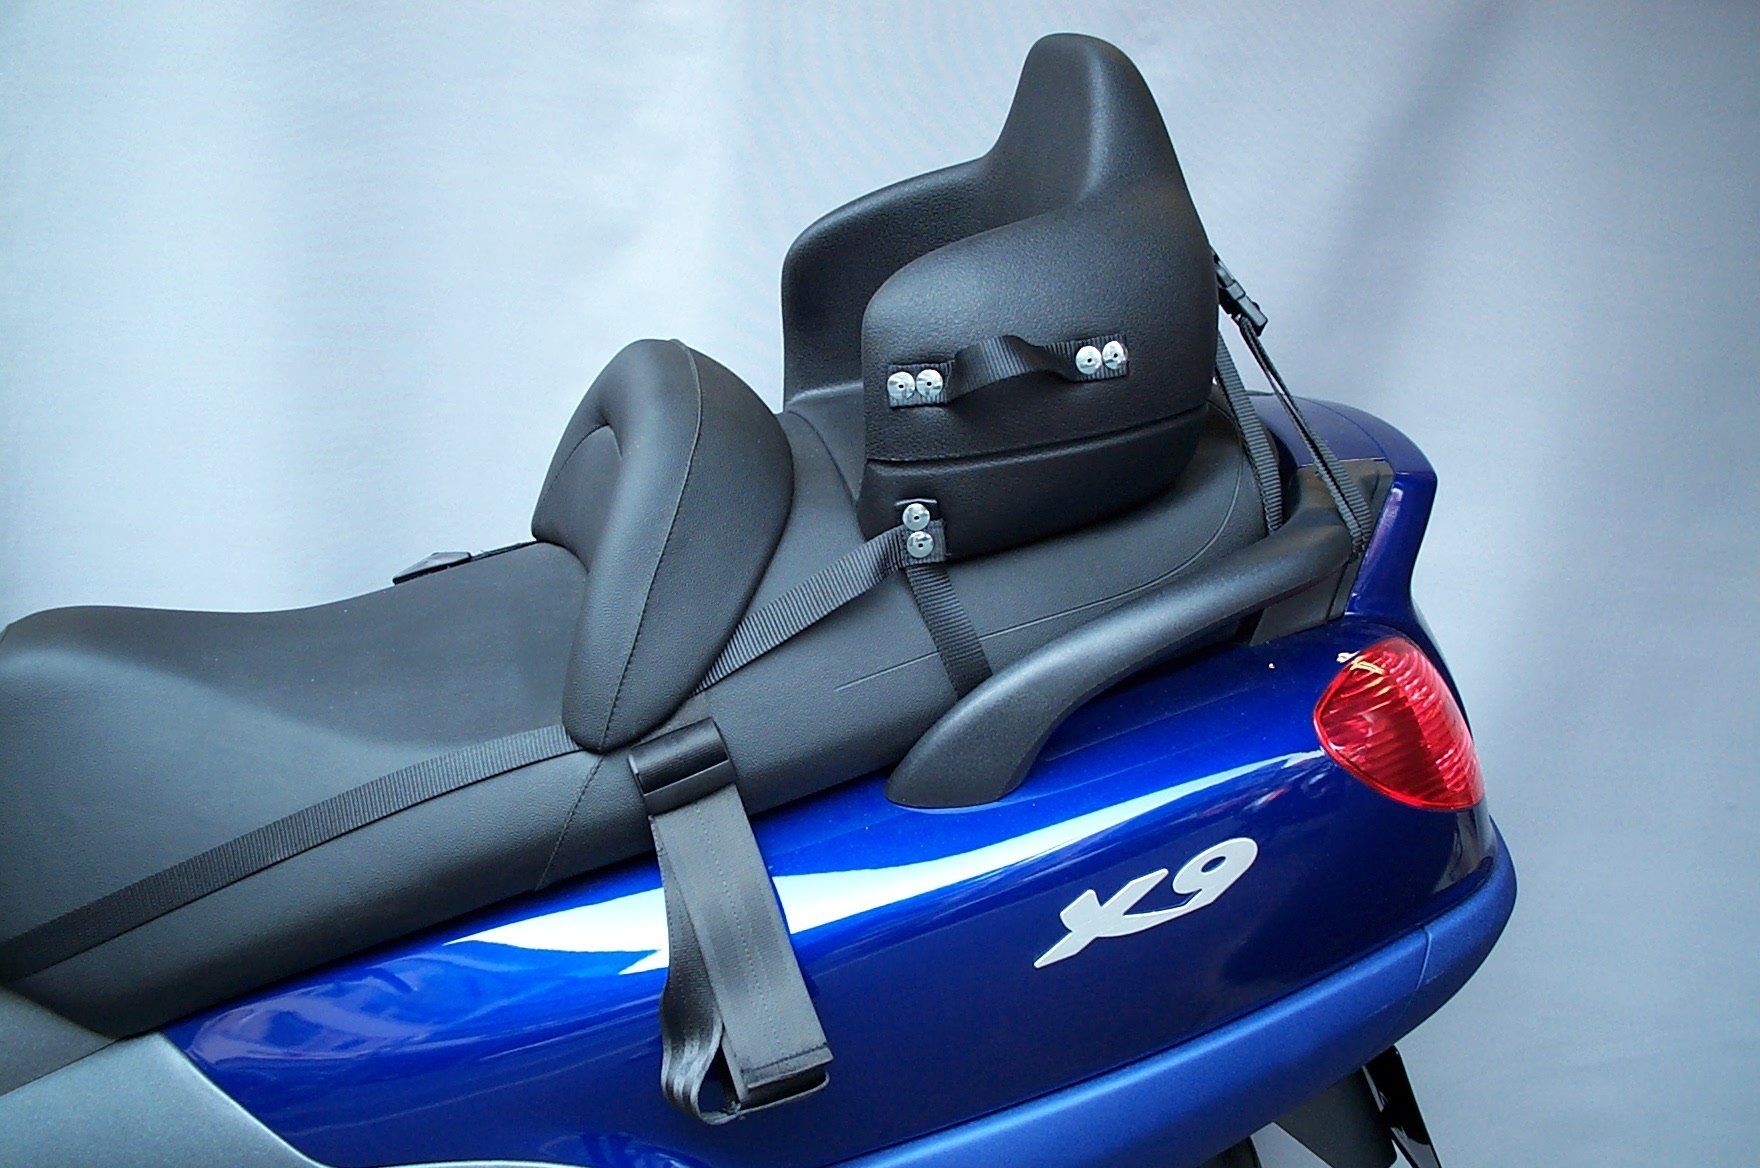 Child seat for Maxi scooter